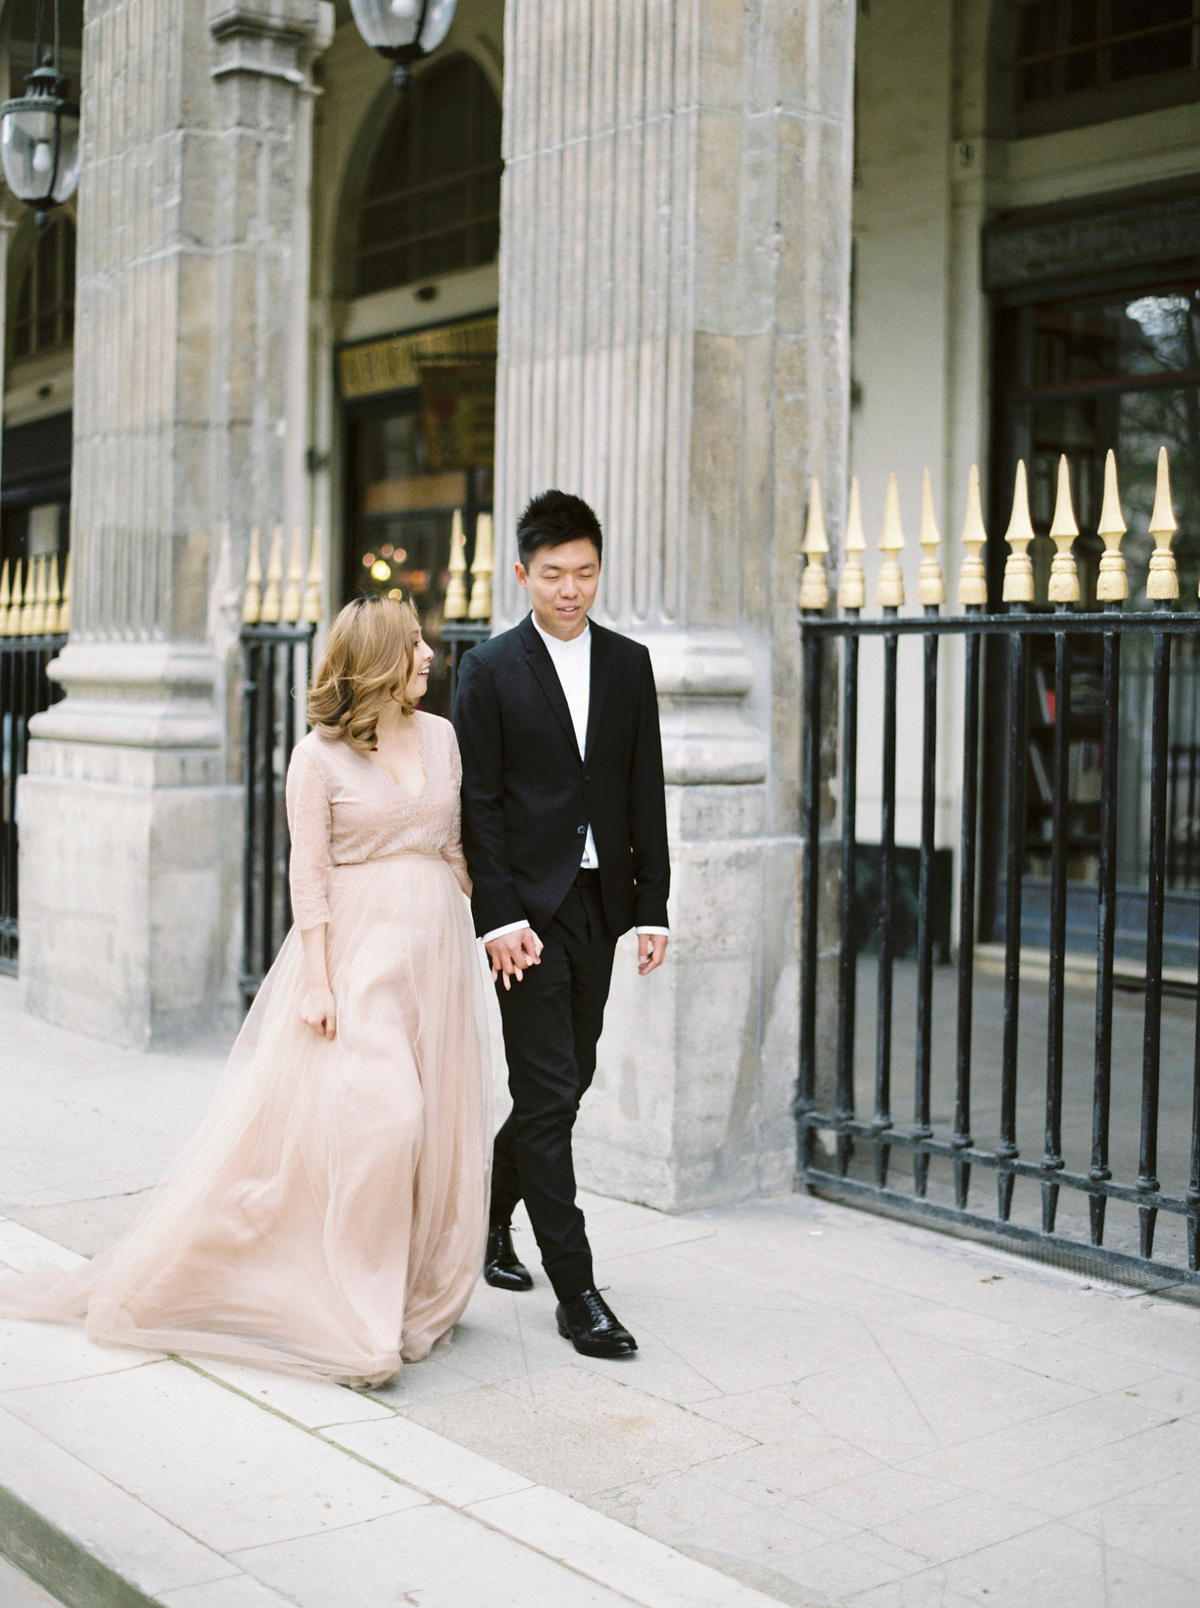 An engagement shoot in Paris. Photography by Zosia Zacharia.